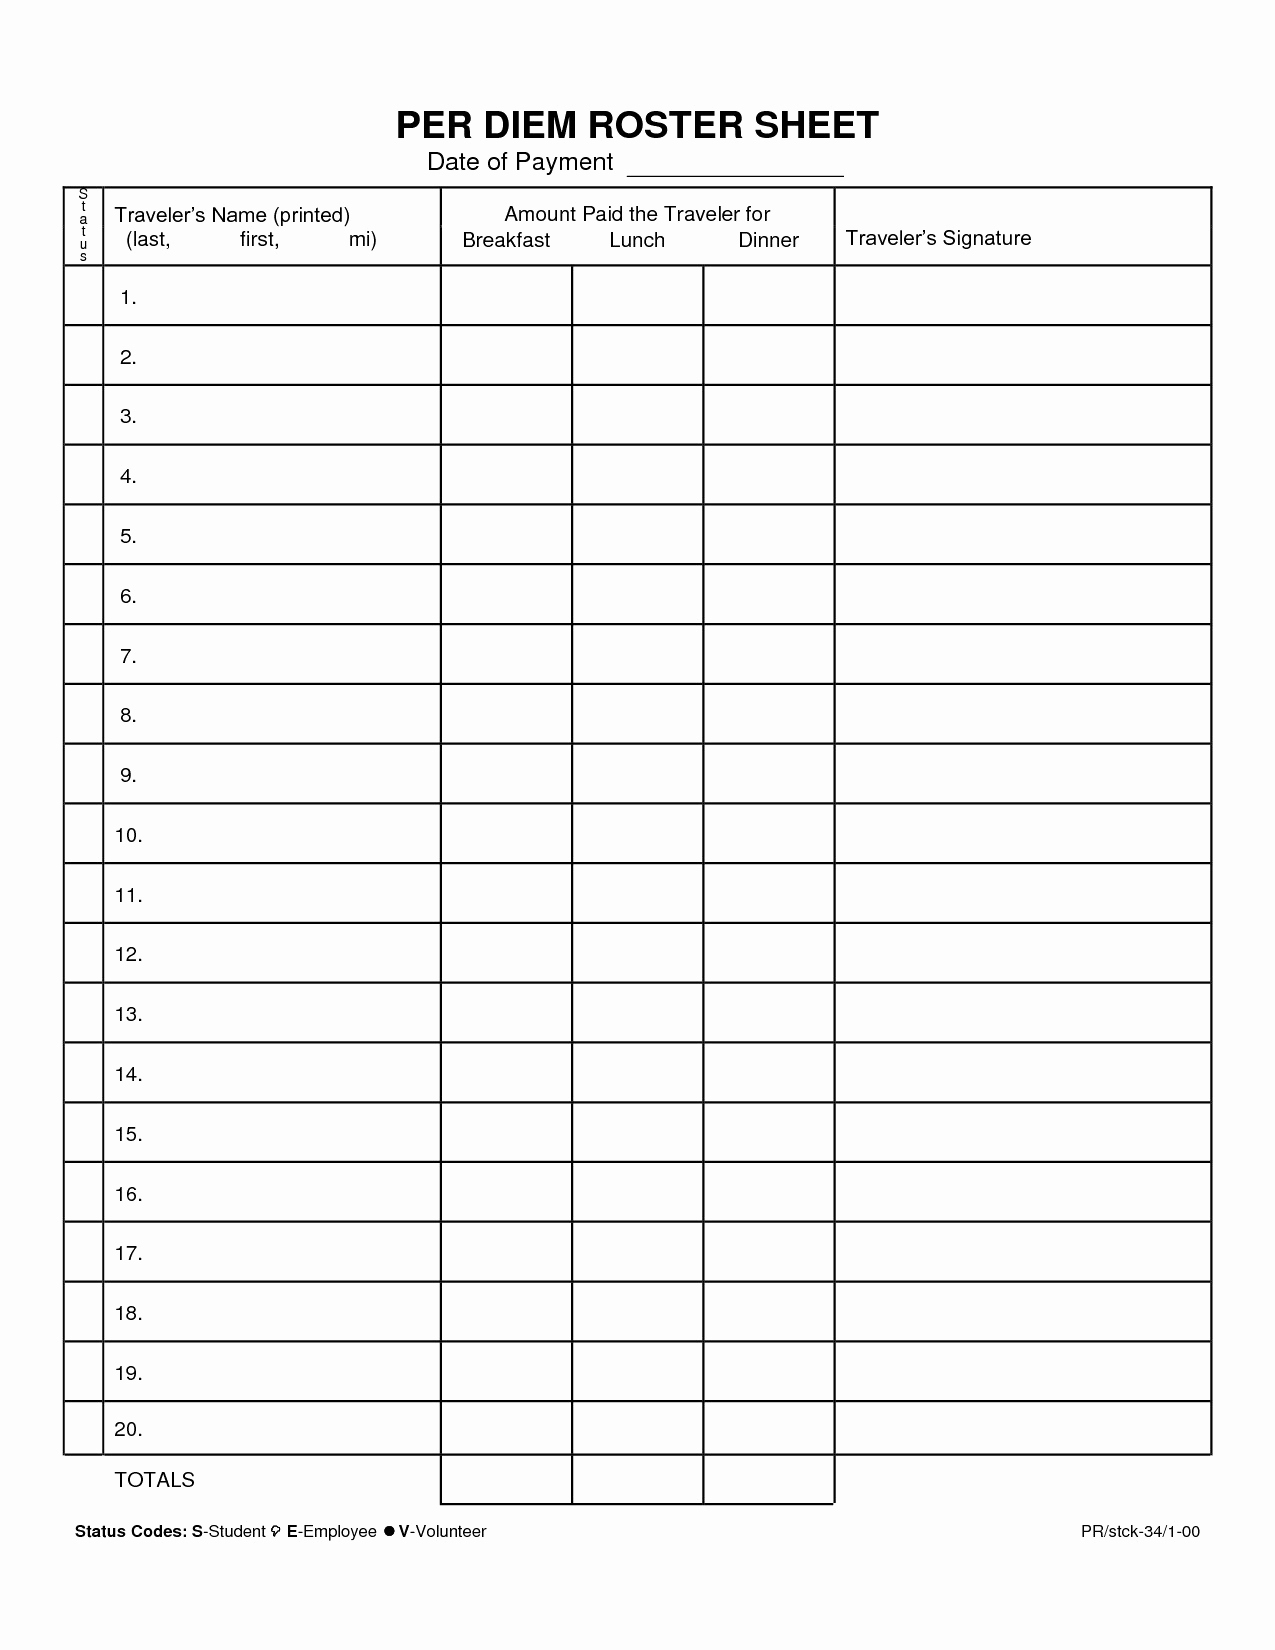 Blank Inventory Spreadsheet Unique Inventory Sheet Template For Blank Inventory Sheet Template